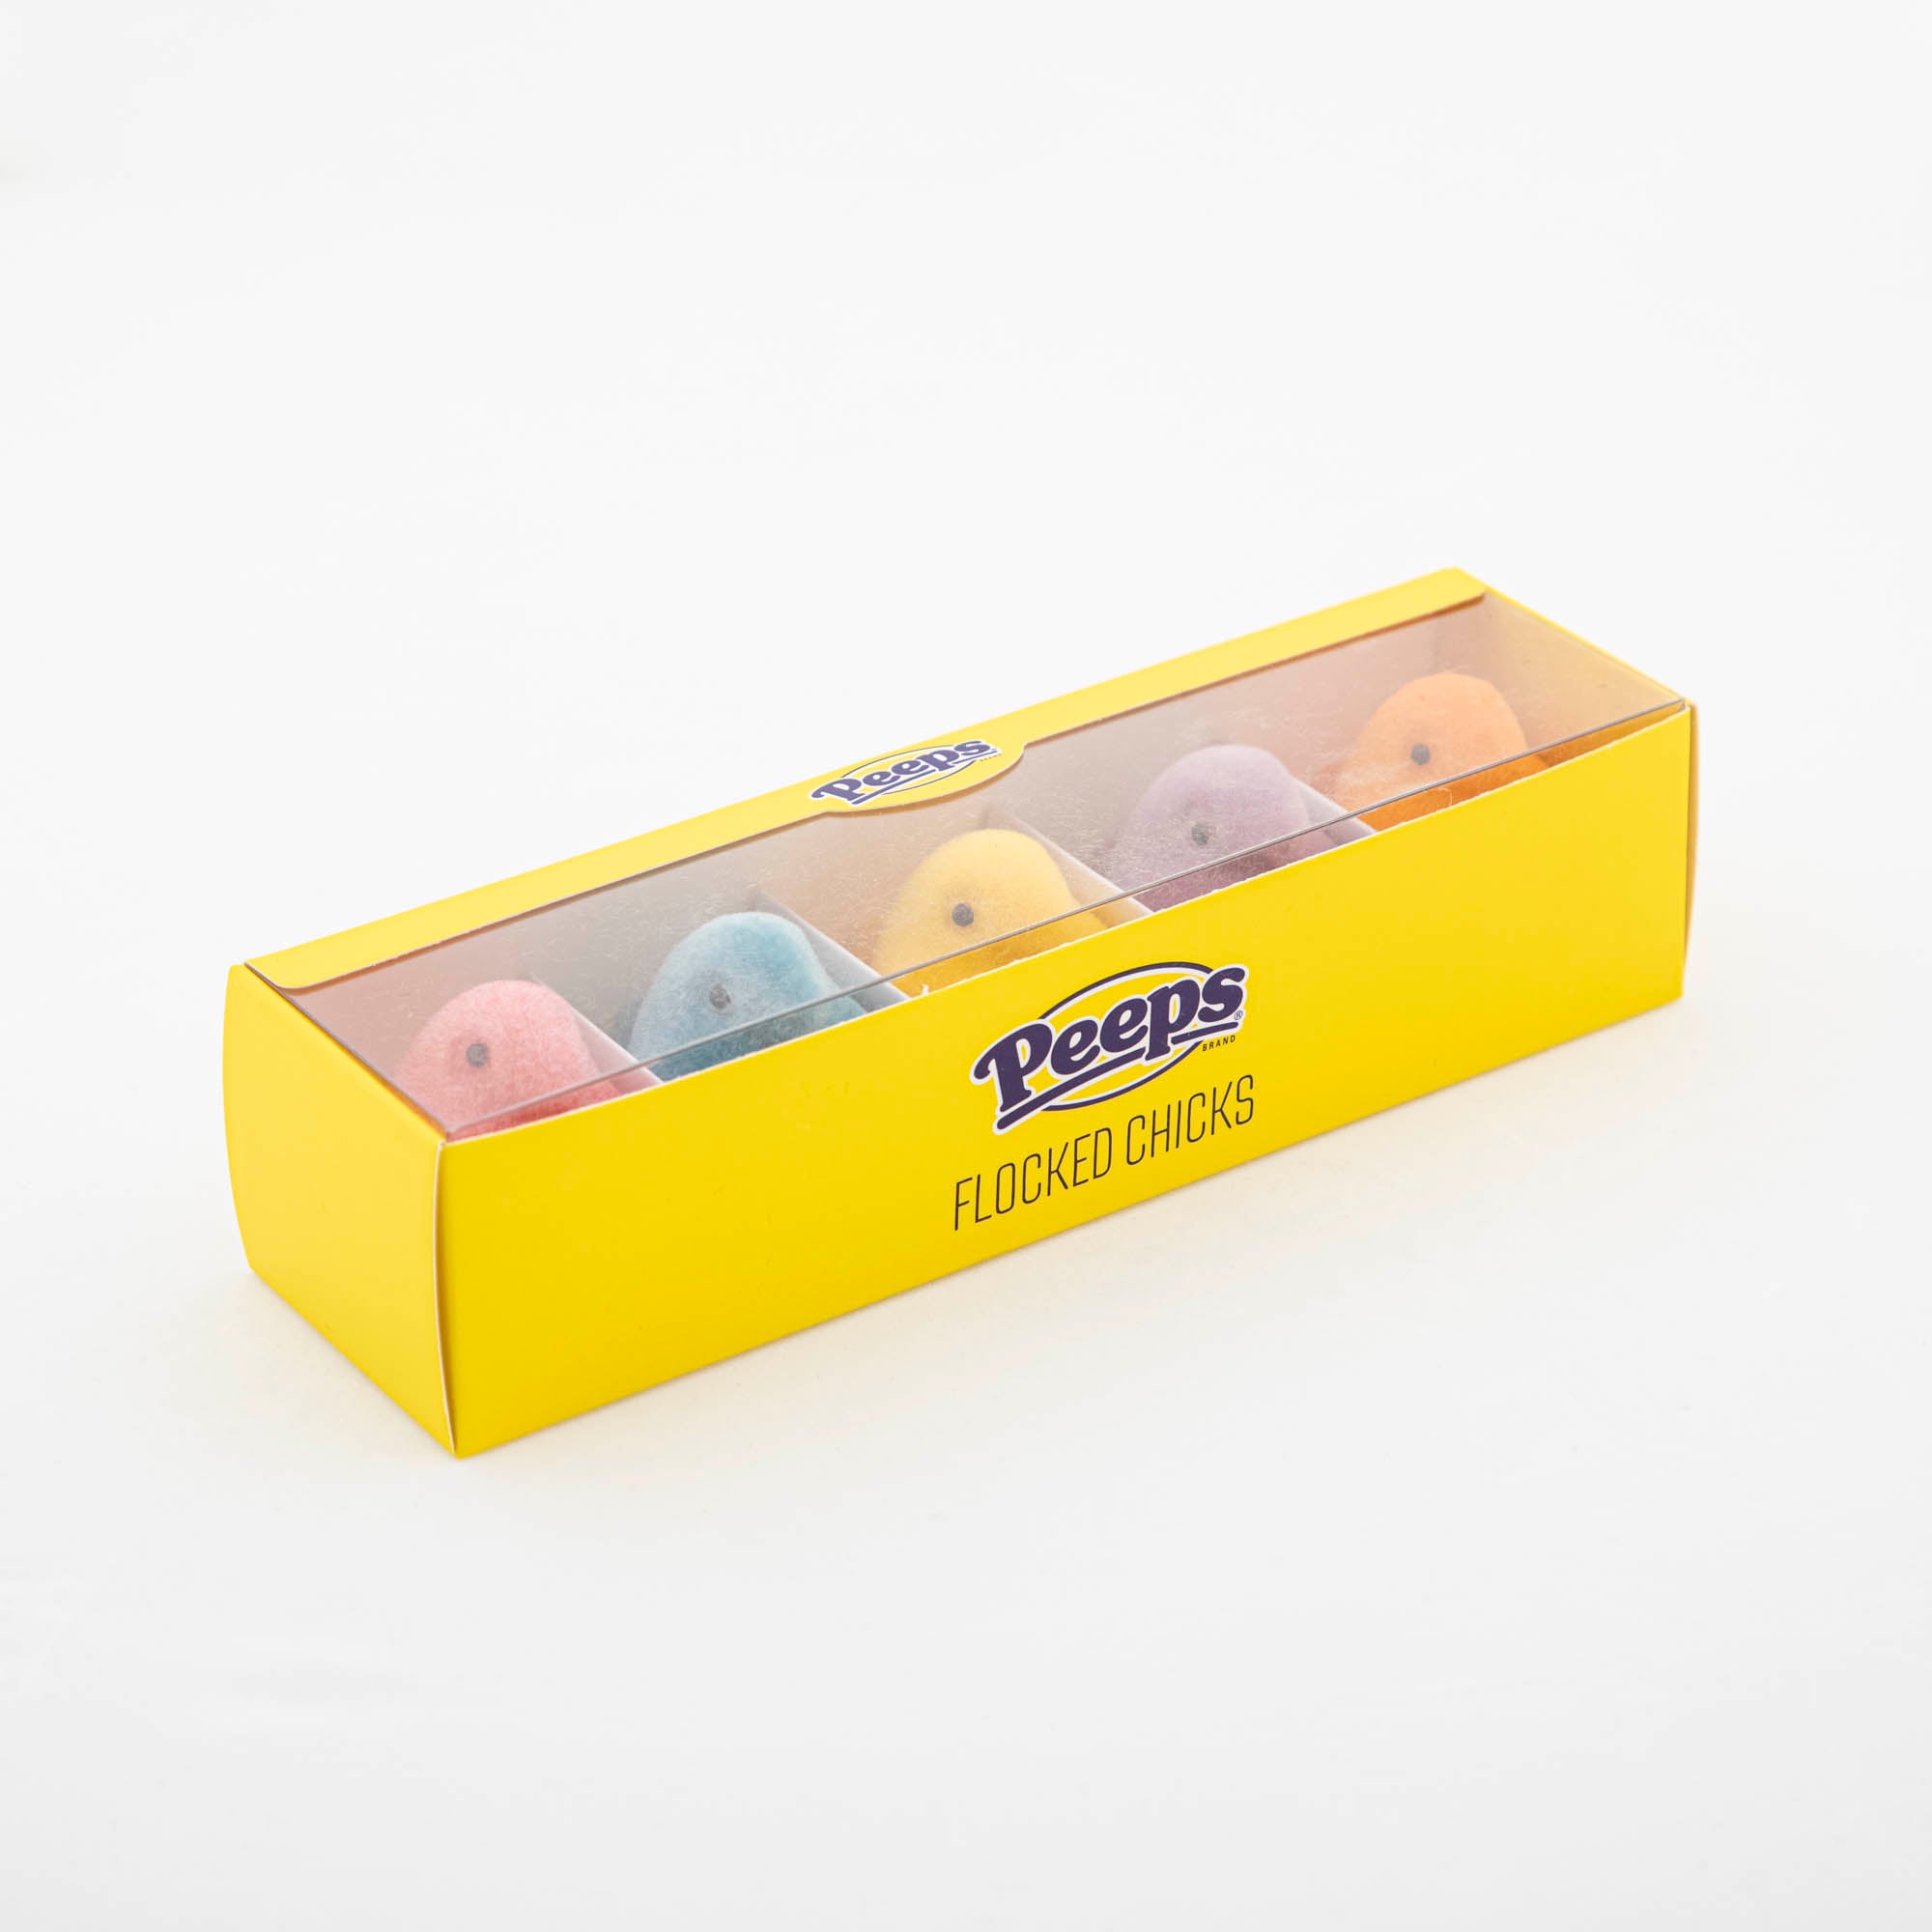 This Glitterville boxed set of Small Flocked PEEPS® Chicks is filled with marshmallow candies.